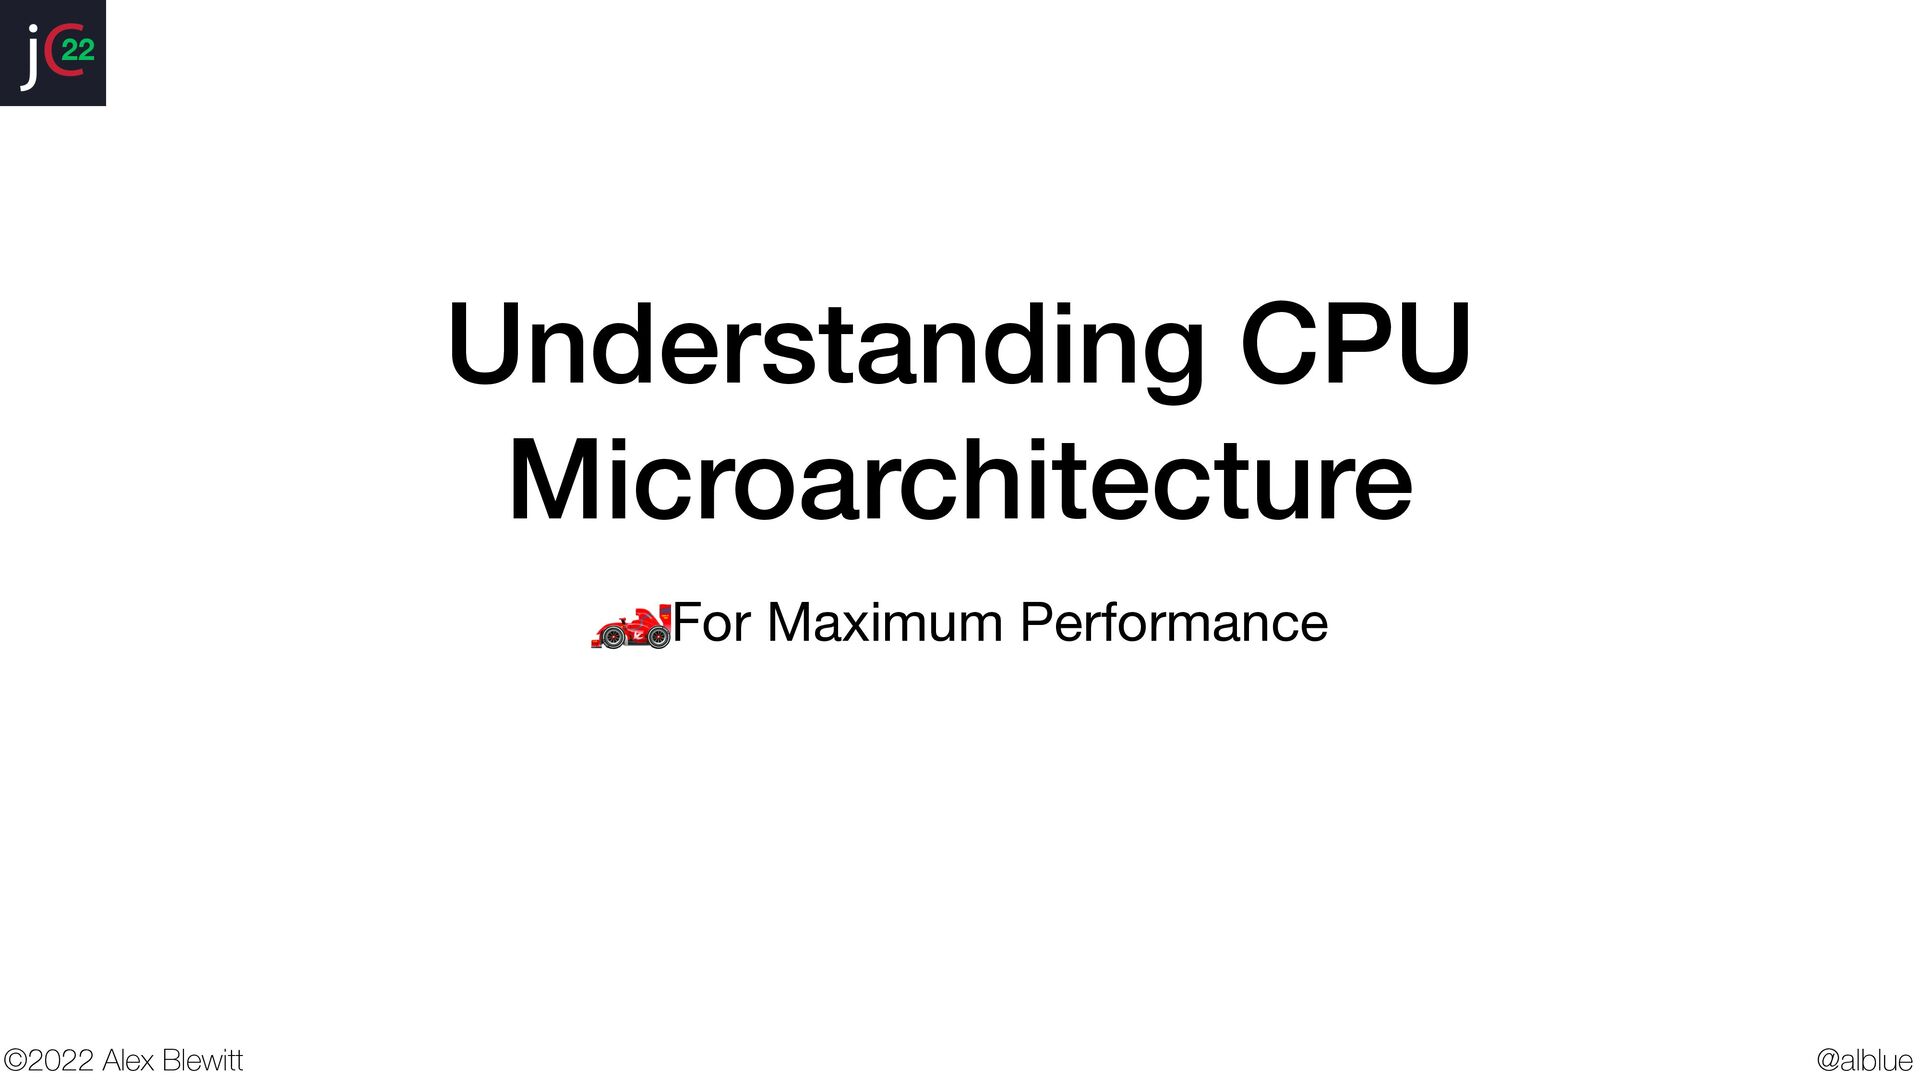 Microprocessors have evolved over decades to eke out performance from existing code. But the microarchitecture of the CPU leaks into the assumptions o